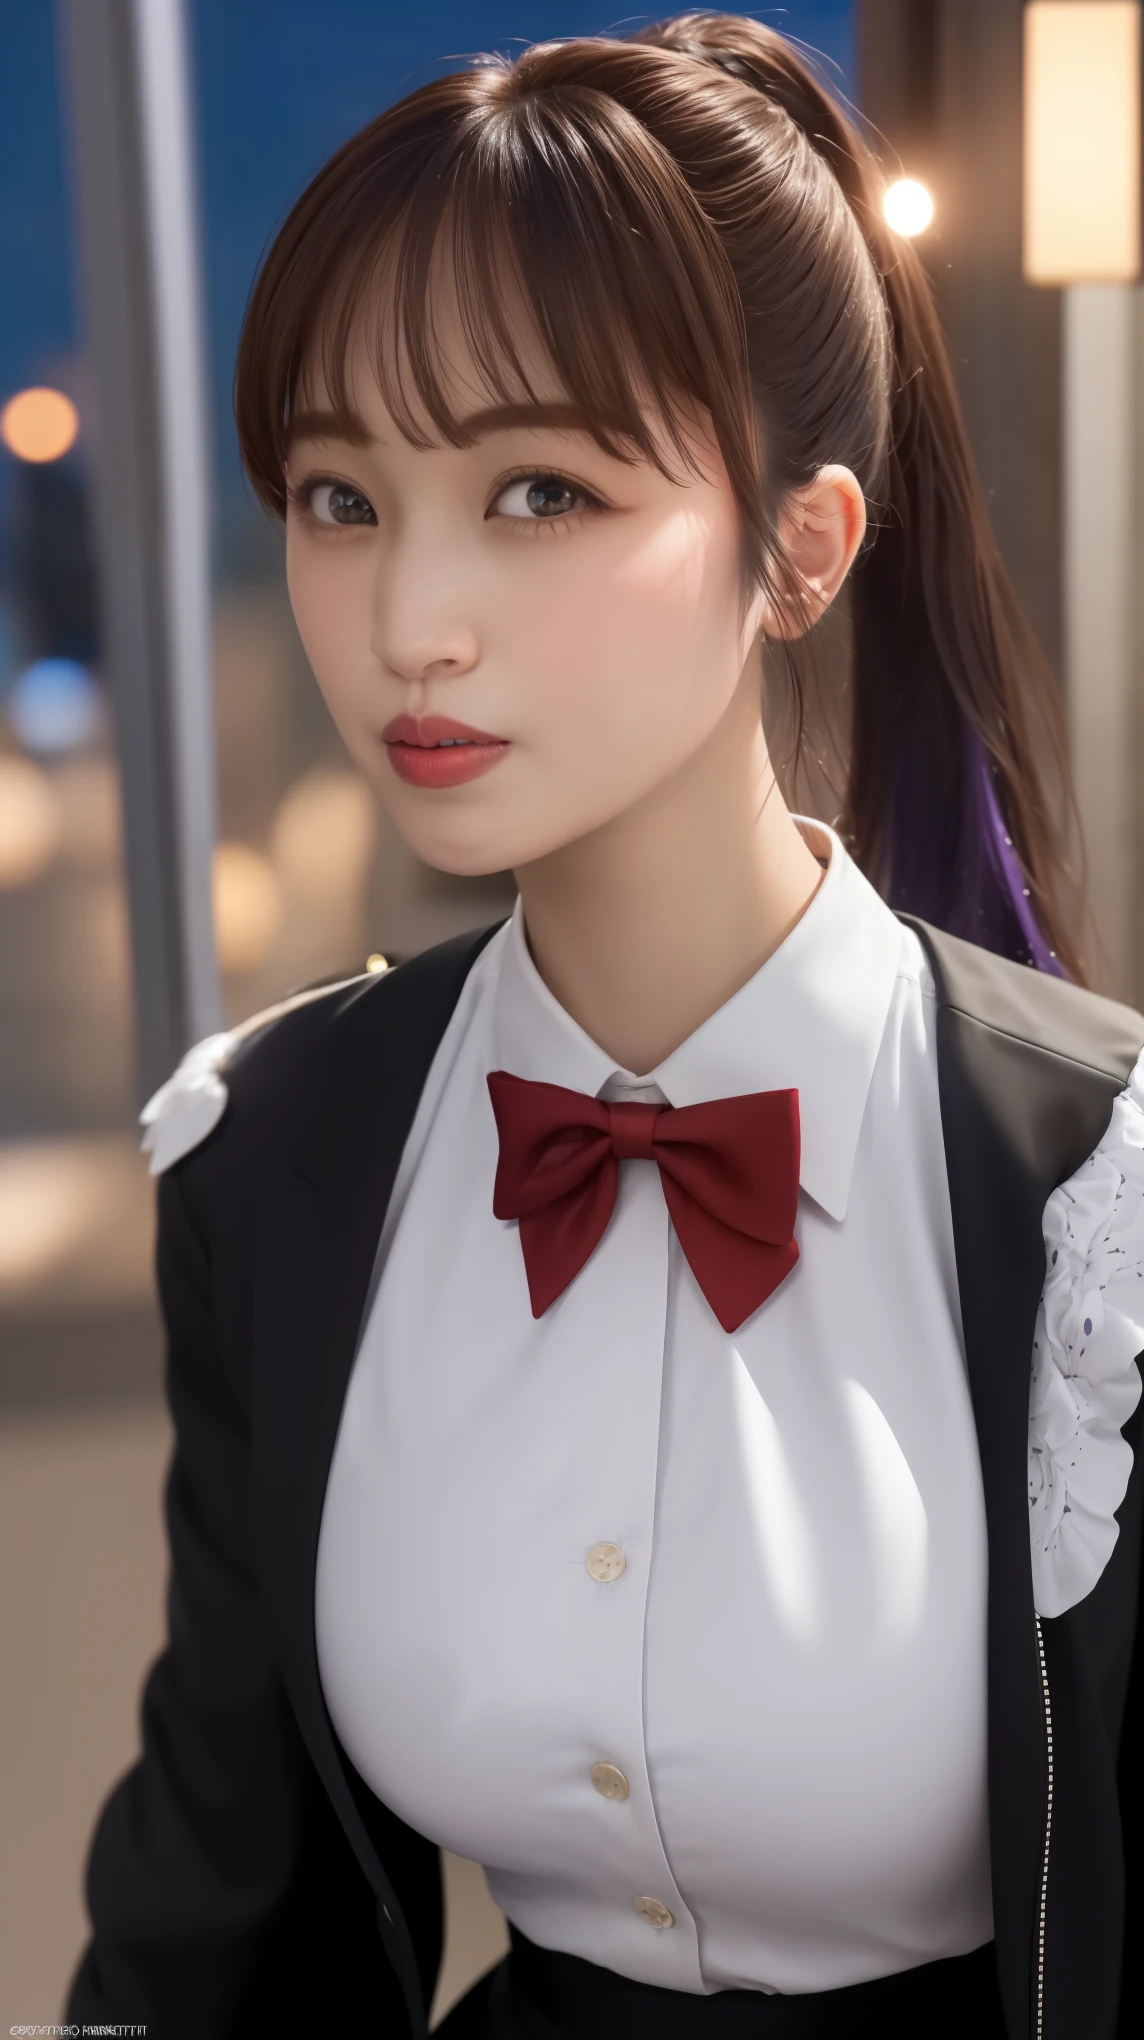 (Night:1.7), Japan, Tokyo, CityView, Before Window,
Standing at attention,
Black_jacket,white shirt, Black_Skirt,sailor outfit,red bowtie,puffy sleeves,long sleeves, 
jewelry,
purple eyes, purple hair,Bangs, ponytail,long hair, 
1 girl, 24yo,mature female,Beautiful Finger,Beautiful long legs,Beautiful body,Beautiful Nose,Beautiful character design, perfect eyes, perfect face,
looking at viewer,girl in the center of the image,
NSFW,official art,extremely detailed CG unity 8k wallpaper, perfect lighting,Colorful, Bright_Front_face_Lighting,
(masterpiece:1.0),(best_quality:1.0), ultra high res,4K,ultra-detailed,
photography, 8K, HDR, highres, absurdres:1.2, Kodak portra 400, film grain, blurry background, bokeh:1.2, lens flare, (vibrant_color:1.2)
(Beautiful,Large_Breasts:1.2), (beautiful_face:1.5),(narrow_waist),